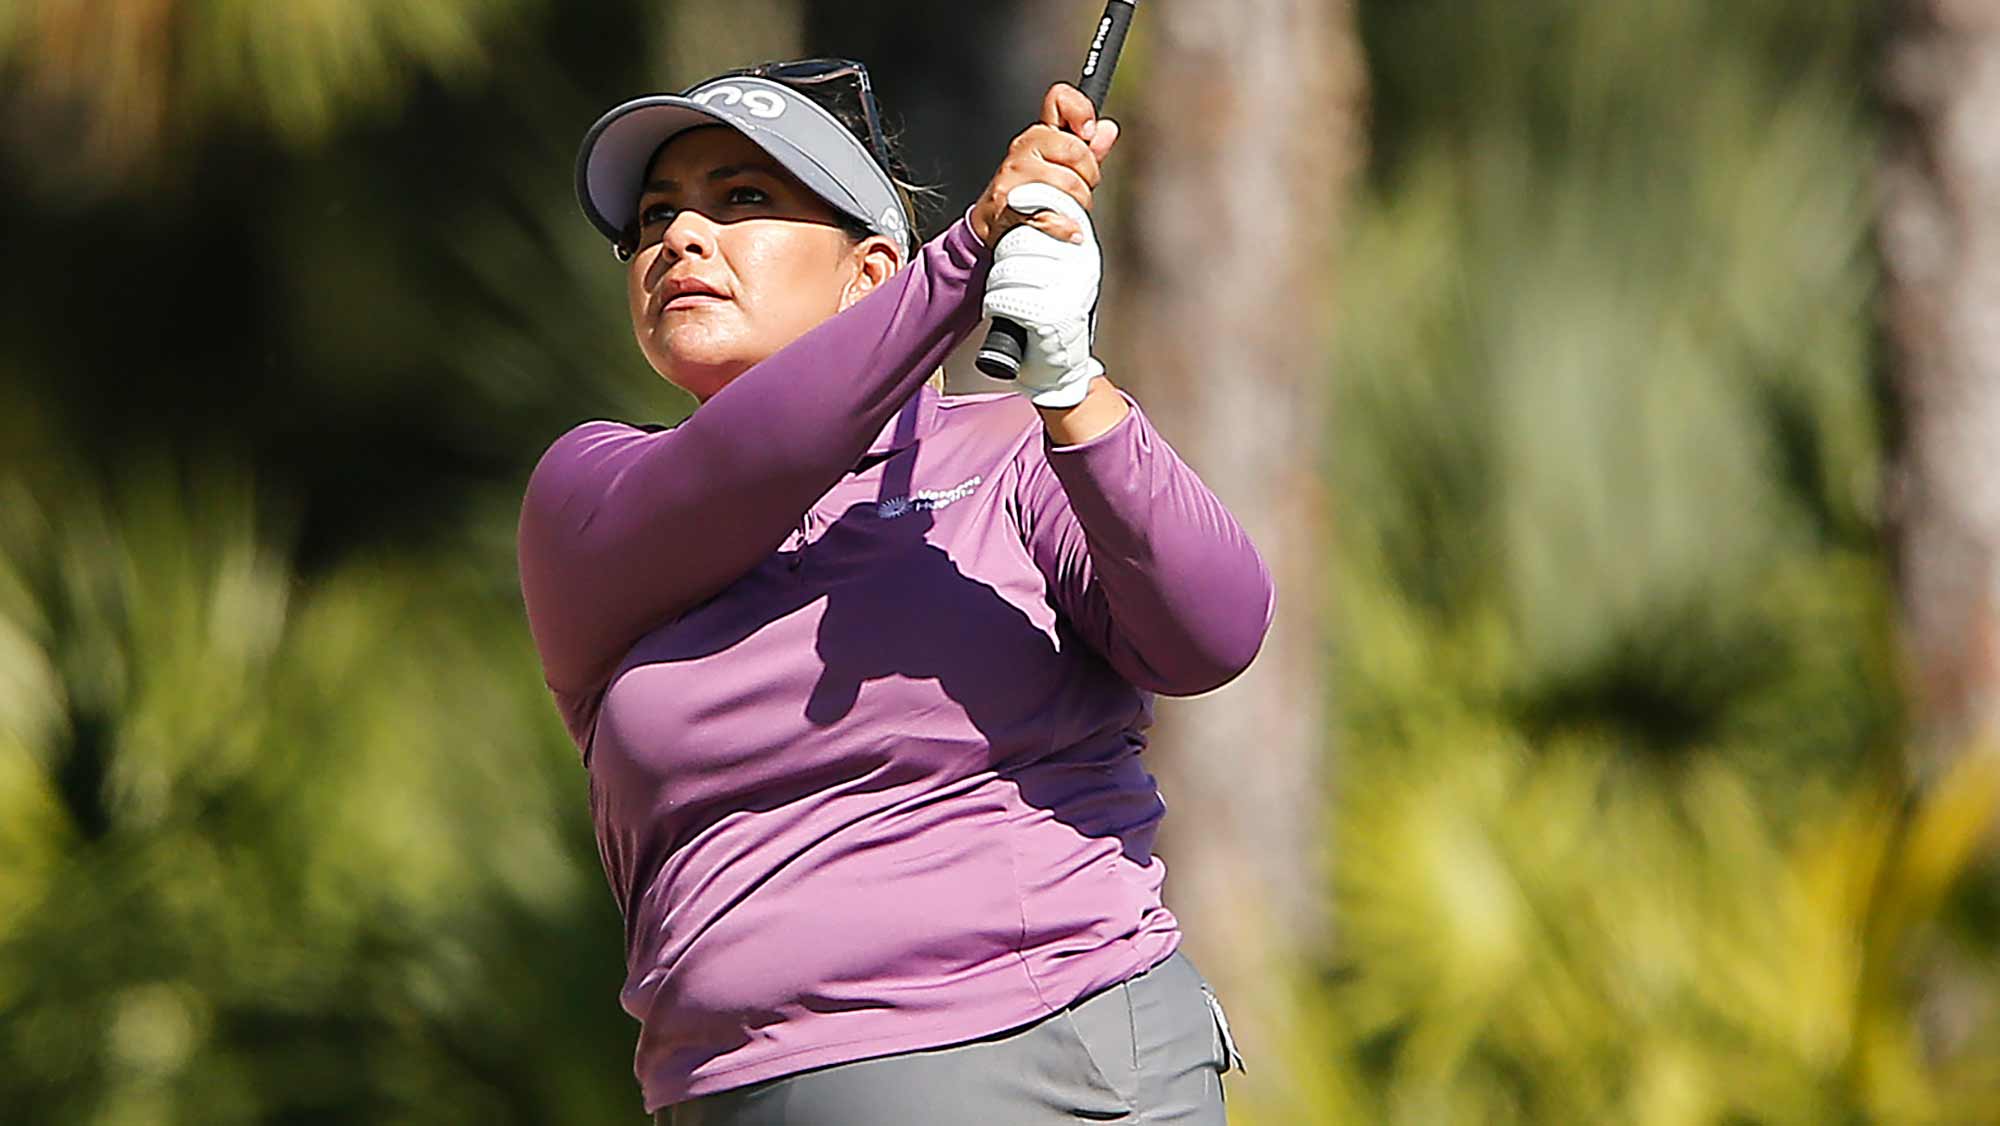  Lizette Salas of the United States plays a shot on the tenth hole during the first round of the CME Group Tour Championship at Tiburon Golf Club on November 21, 2019 in Naples, Florida